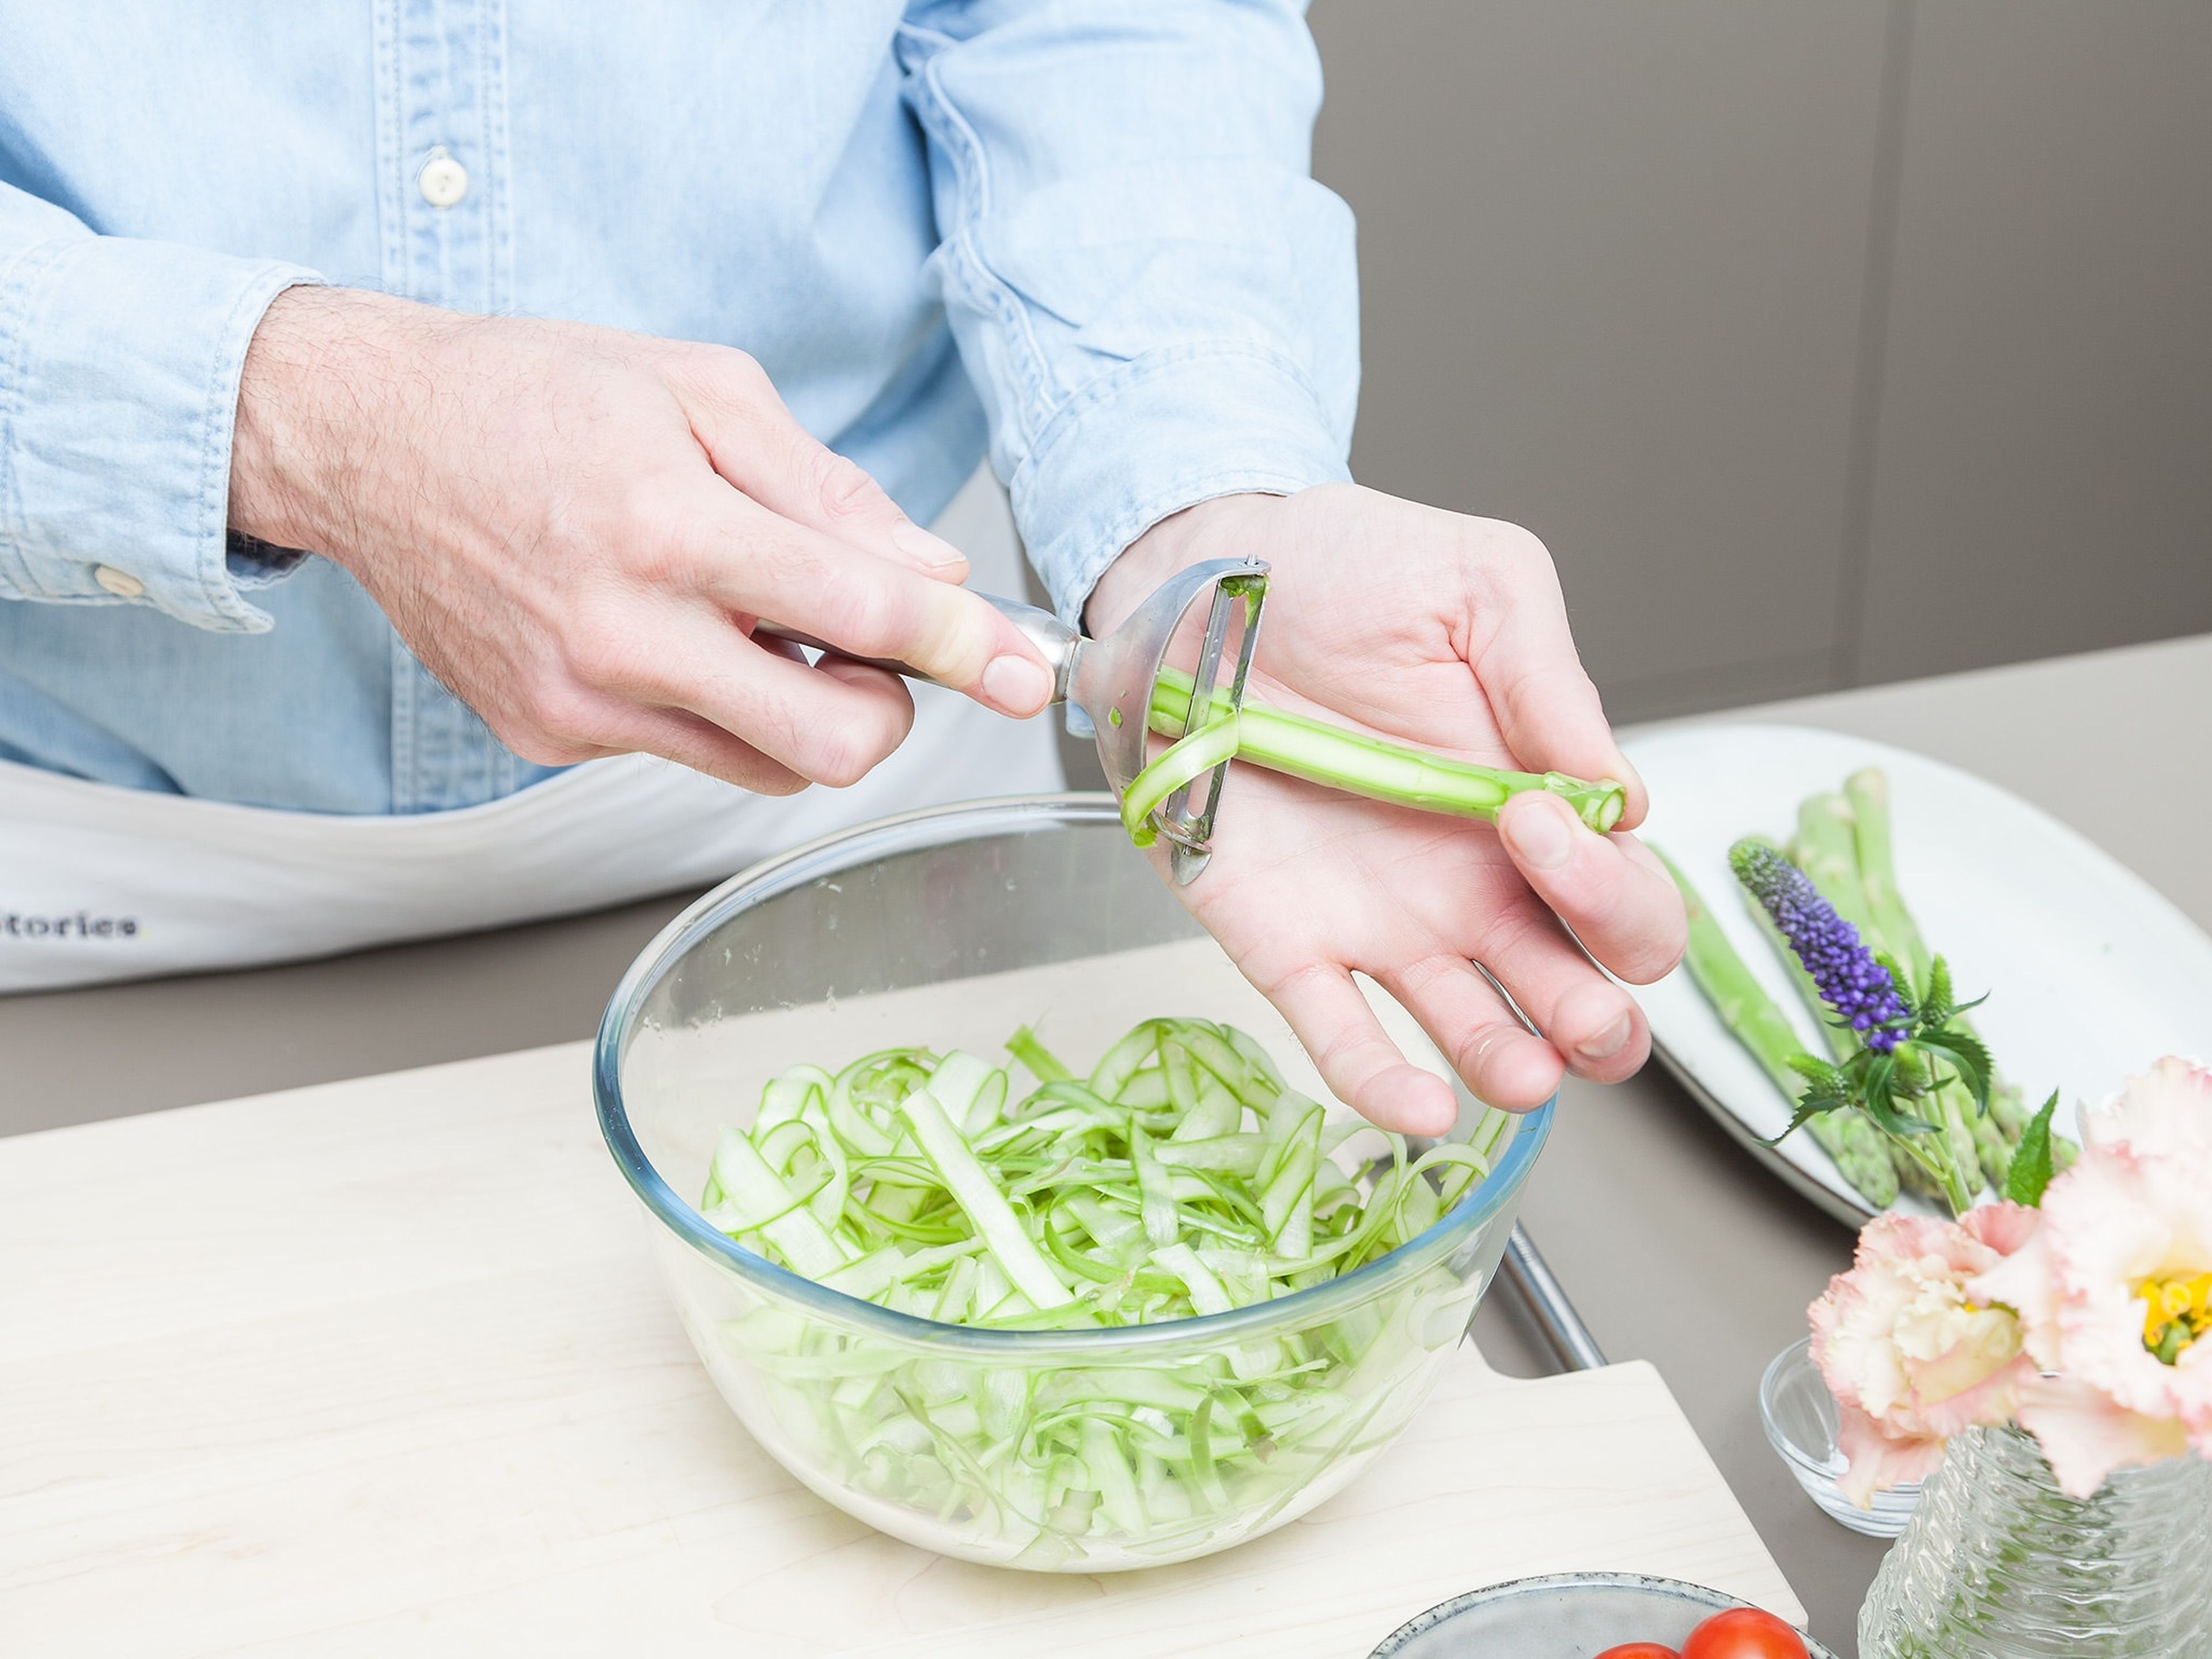 Remove and discard the woody bottom ends of the asparagus. Cut off asparagus heads and add to a large bowl. Shave asparagus stems, quarter tomatoes, and add both to the bowl. Sprinkle with sugar and salt and mix to combine. Let sit for approx. 5 min.